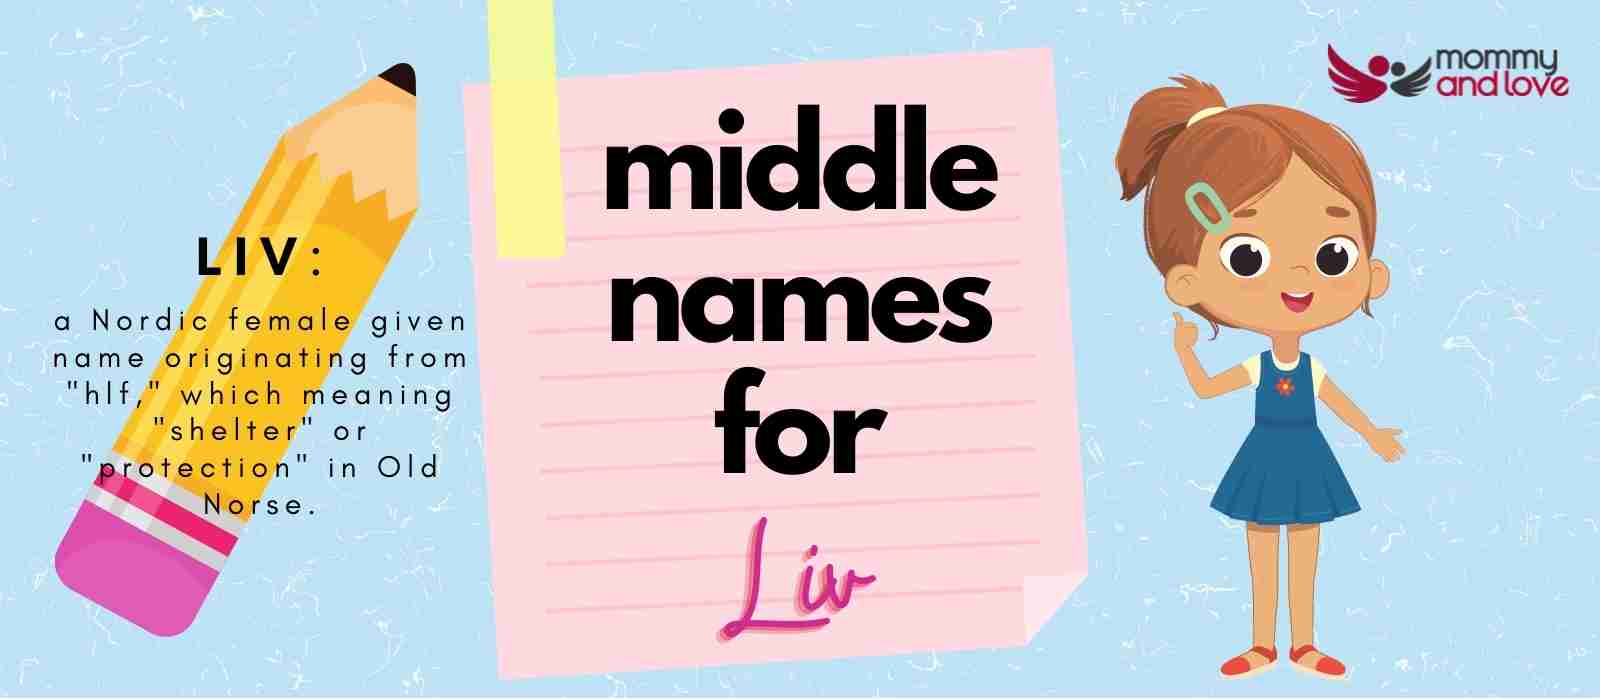 Middle Names for Liv